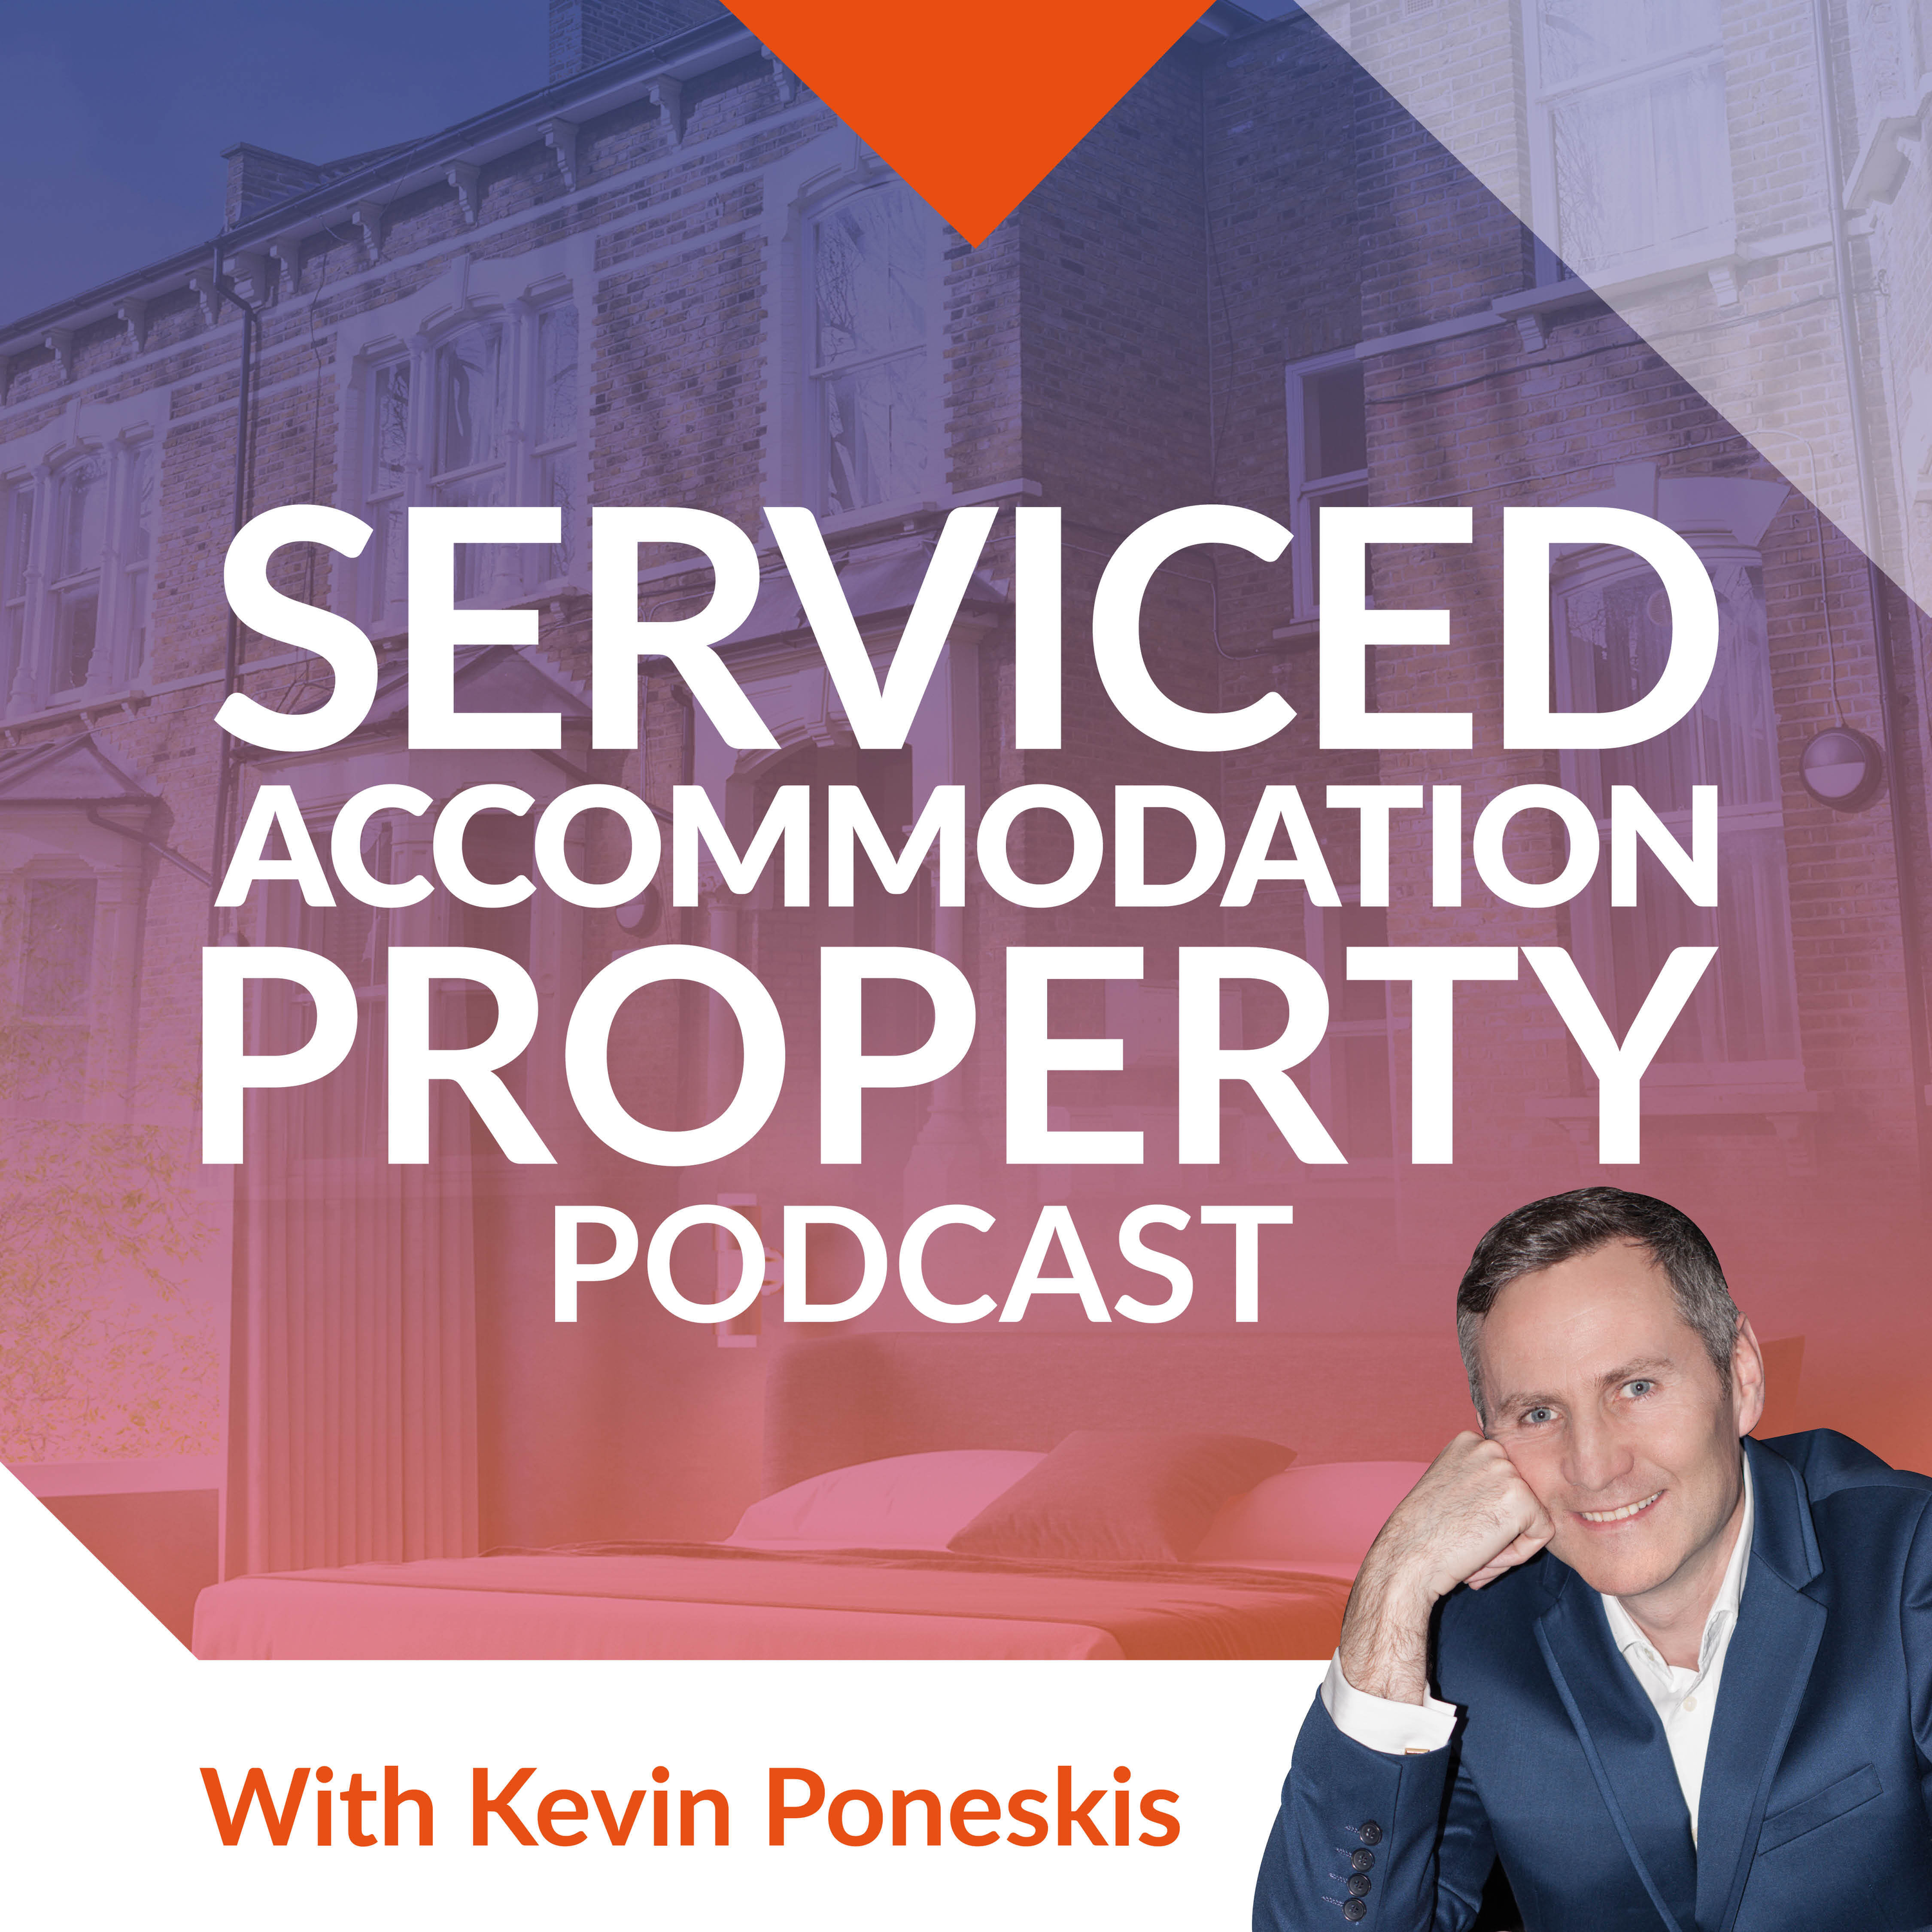 Interview with Mark Homer the Co-Owner of Progressive Property